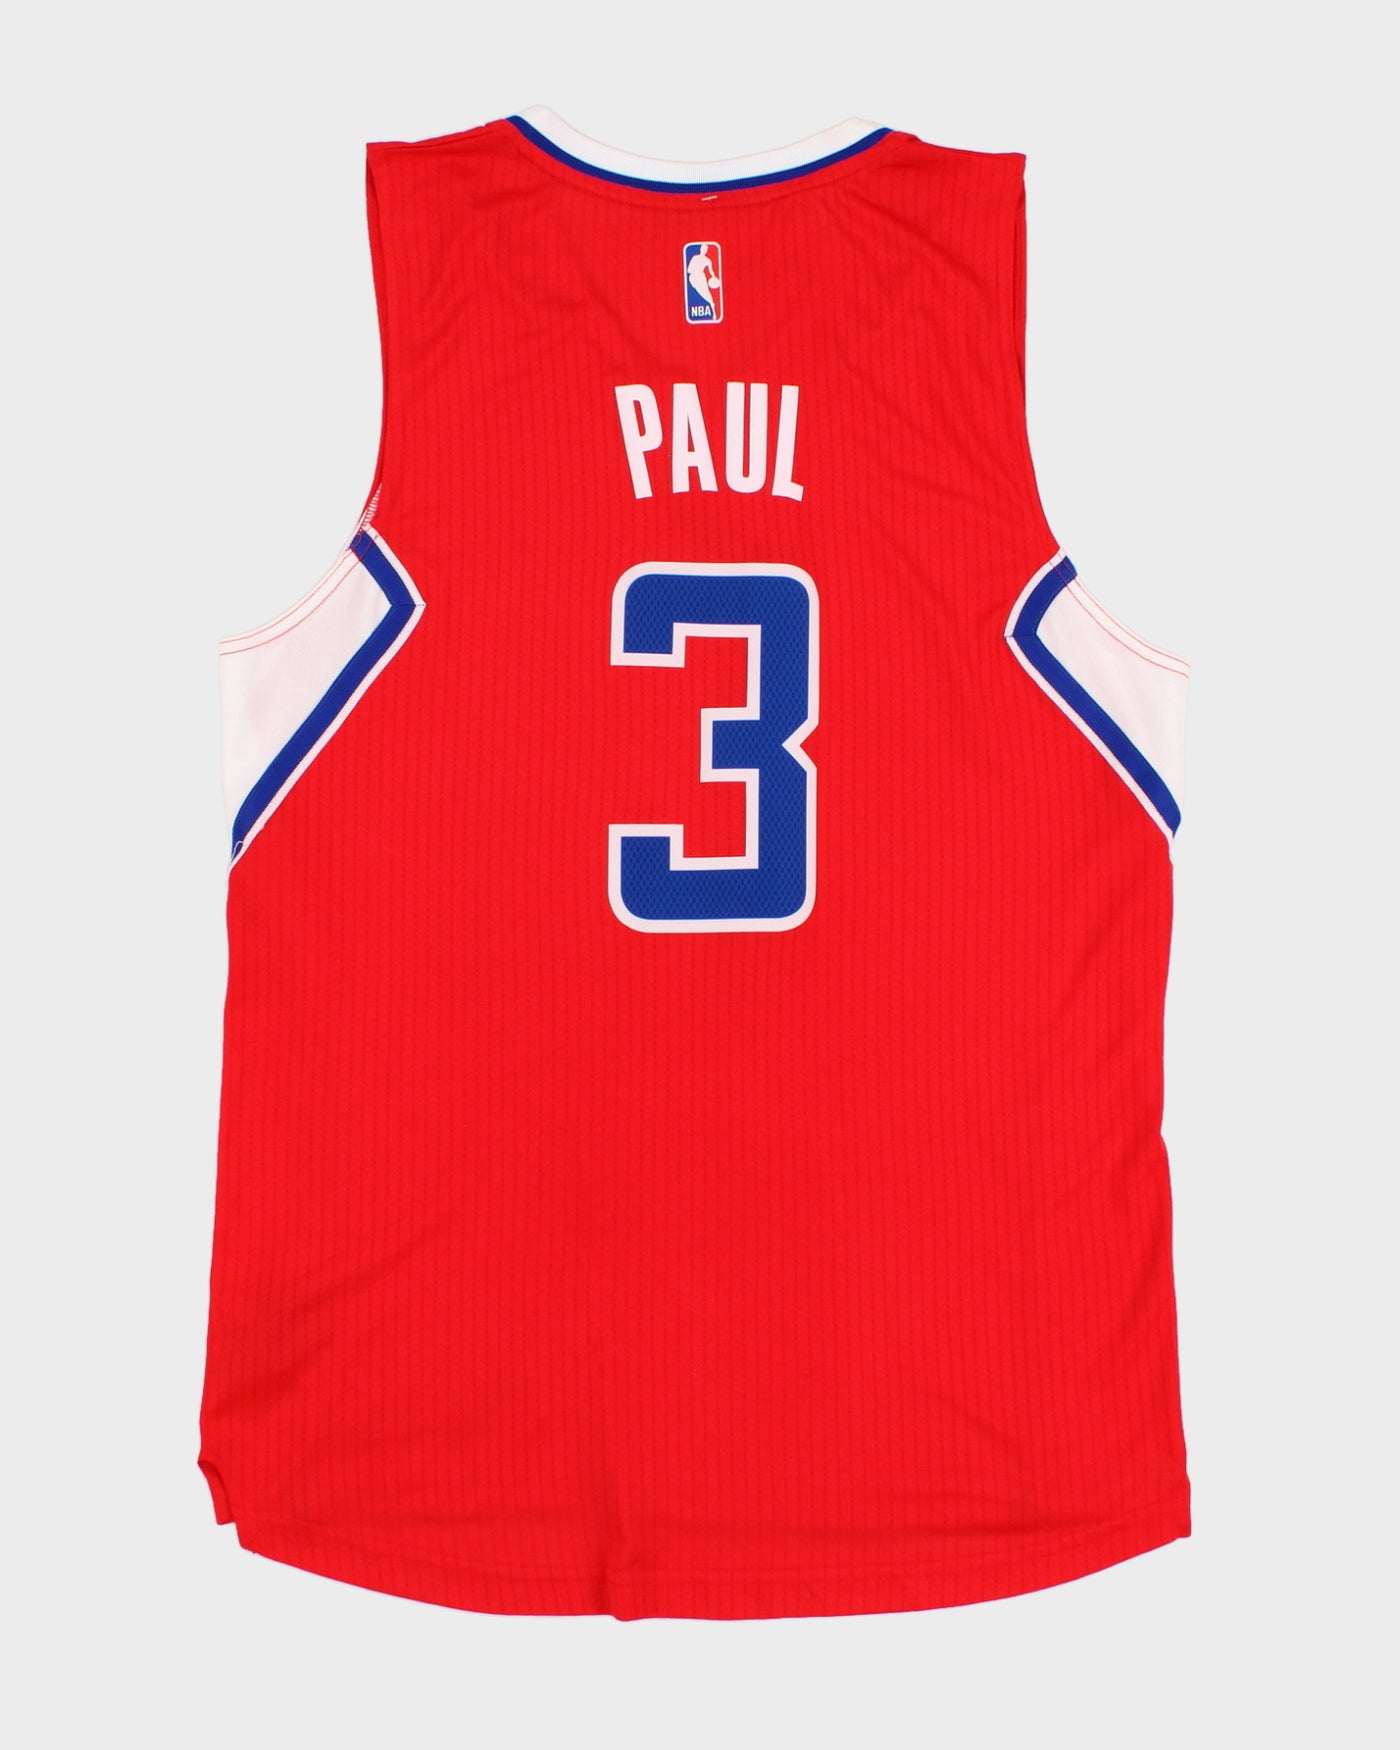 NBA x Los Angeles Clippers Chris Paul #3 Basketball Jersey - M